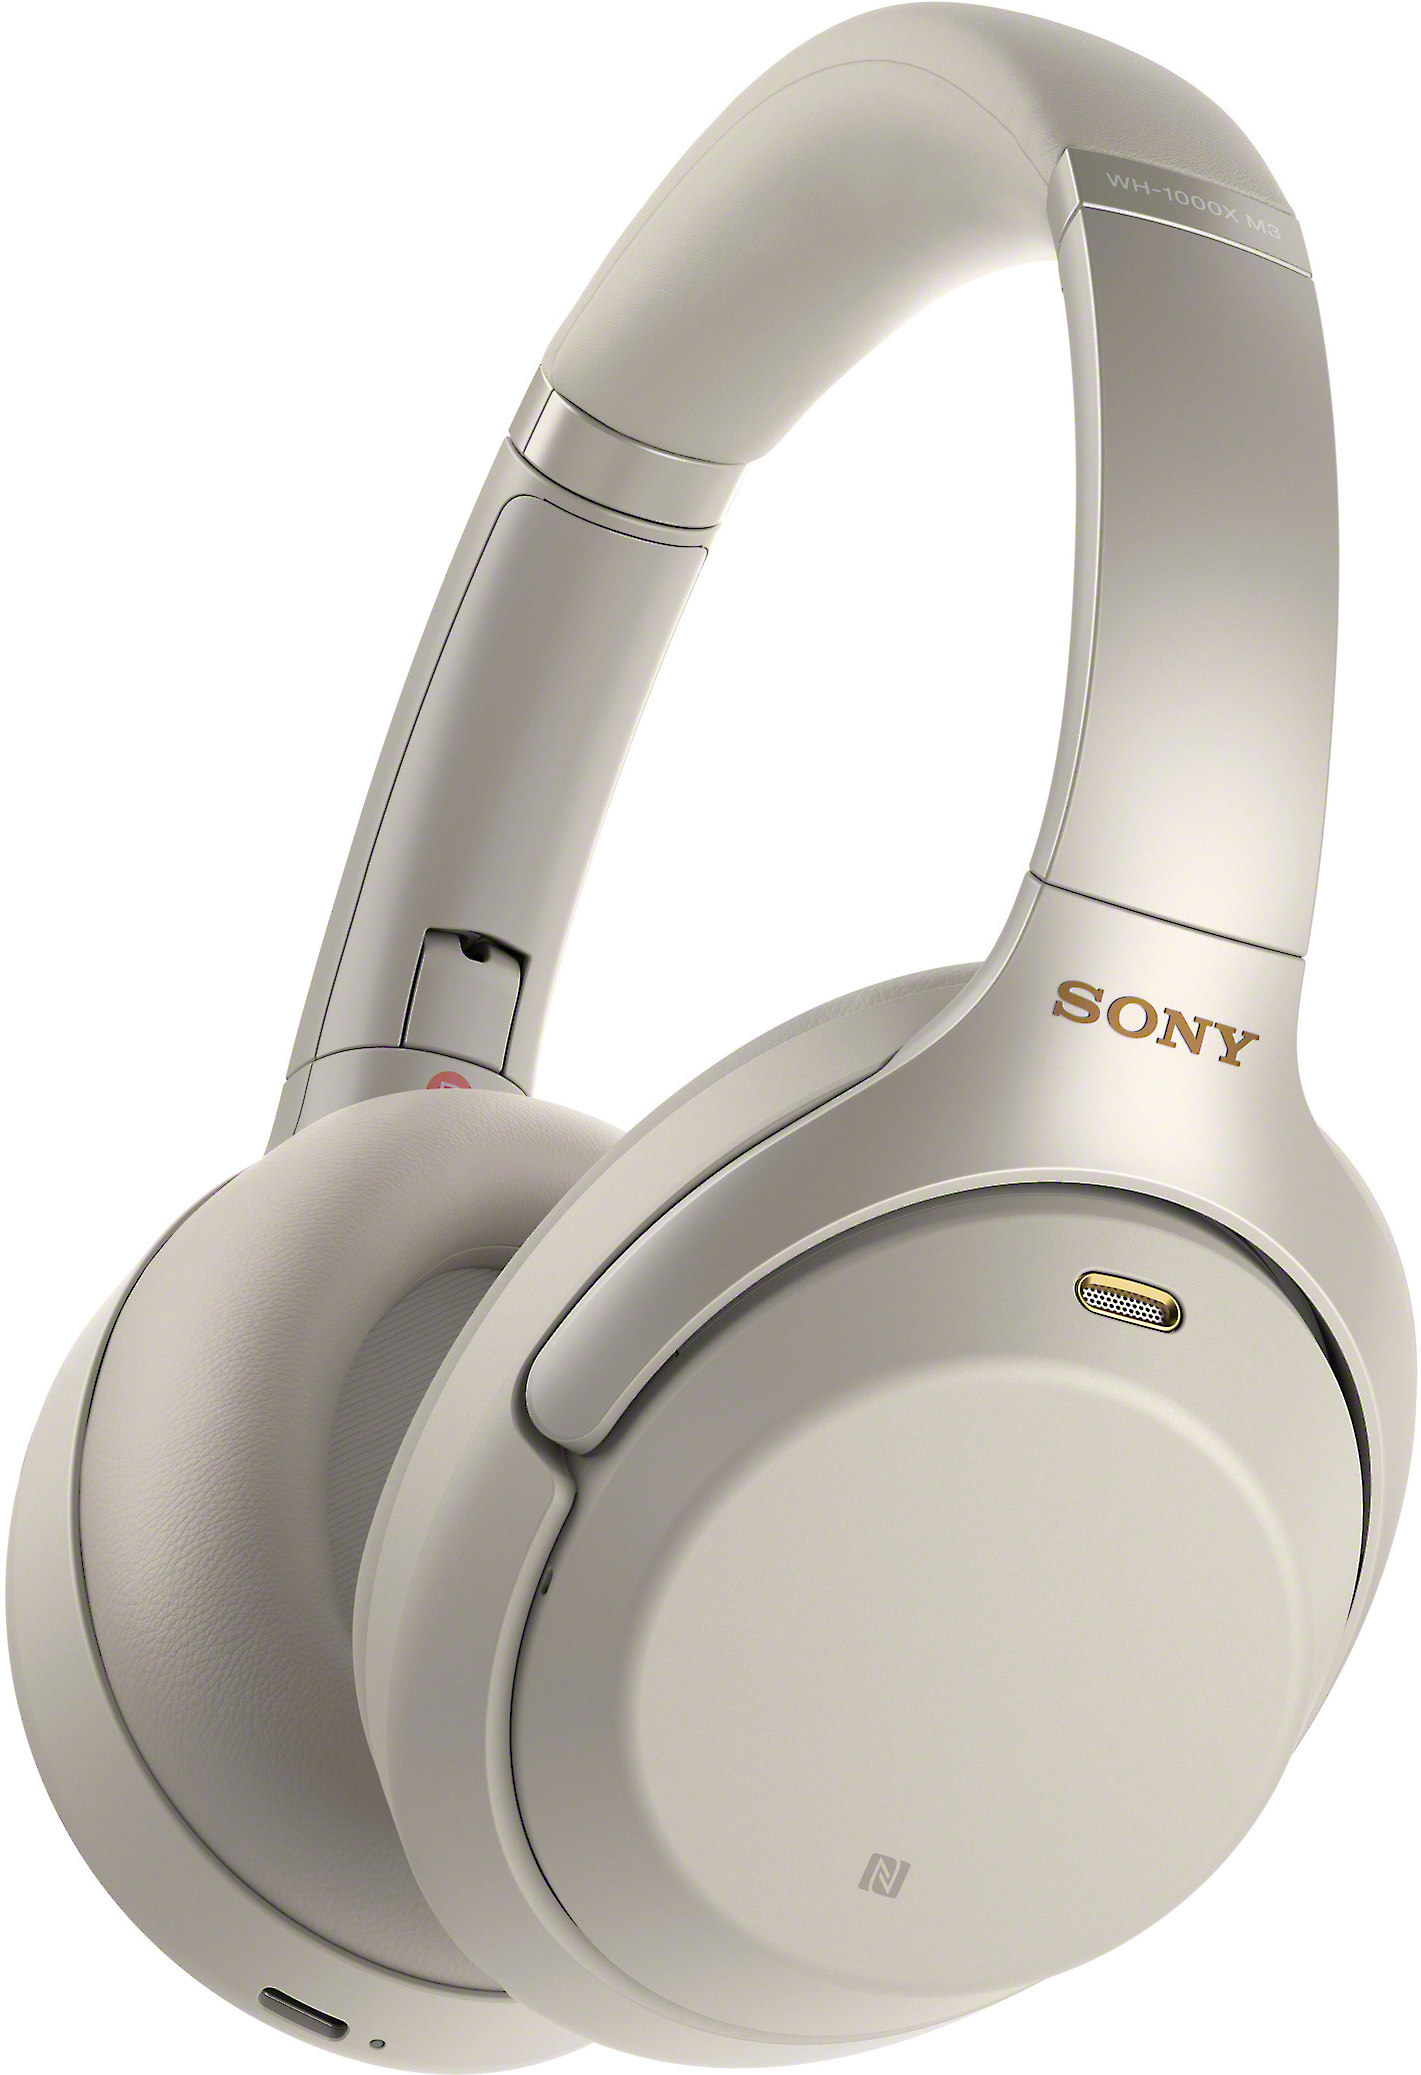 Customer Reviews: Sony WH-1000XM3 (Silver) Over-ear Bluetooth® wireless  noise-canceling headphones at Crutchfield